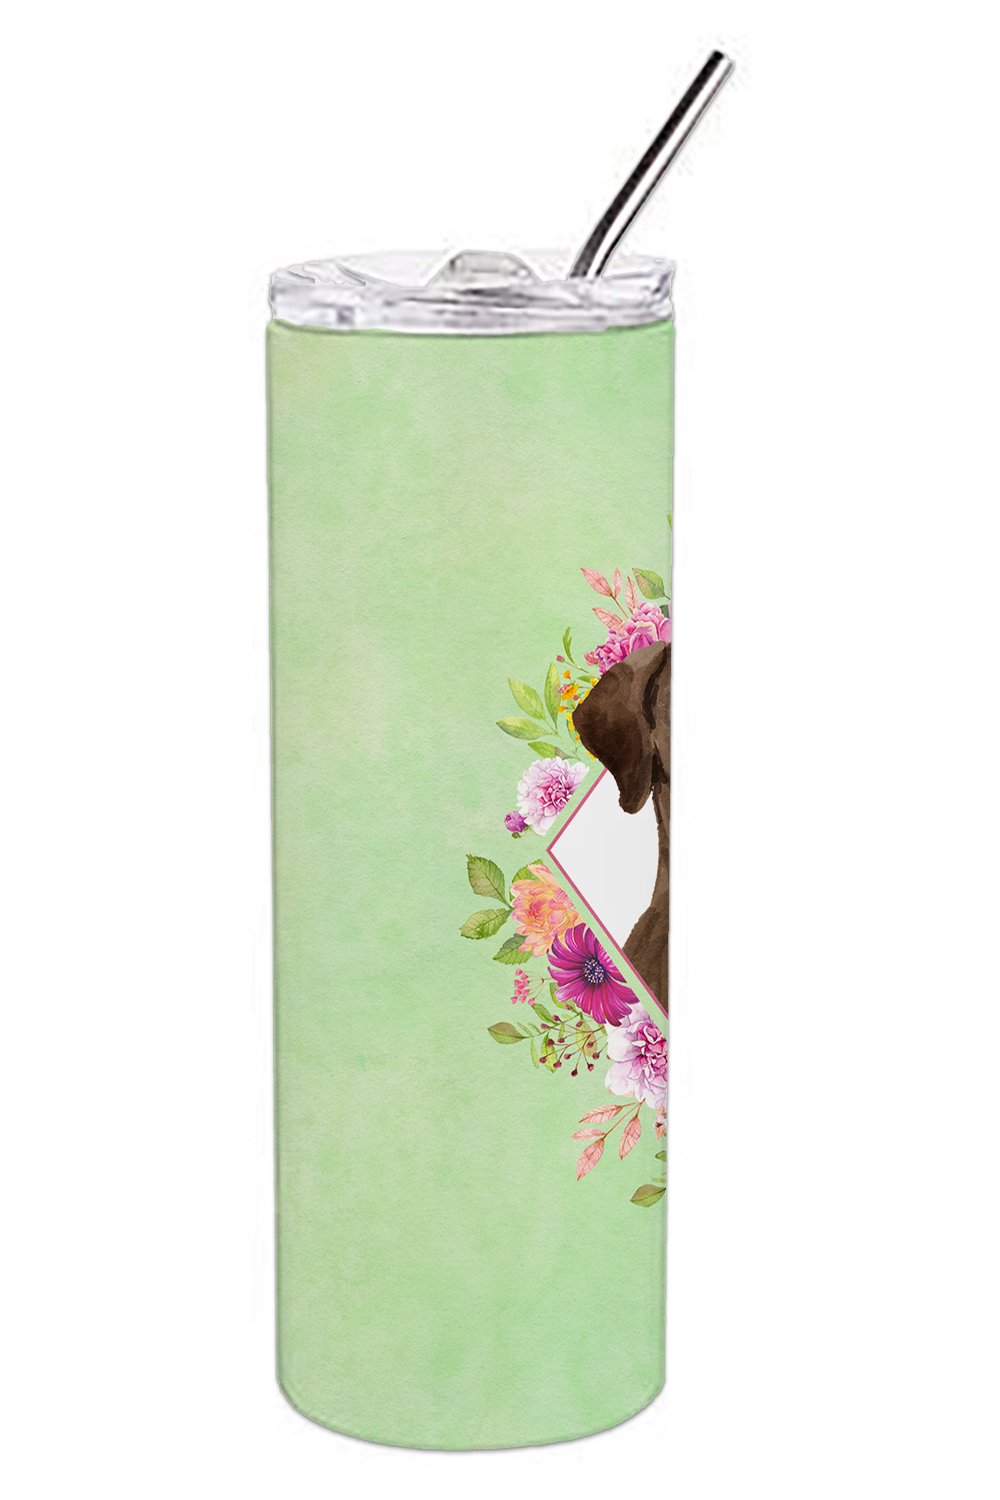 Chocolate Labrador Green Flowers Double Walled Stainless Steel 20 oz Skinny Tumbler CK4411TBL20 by Caroline's Treasures